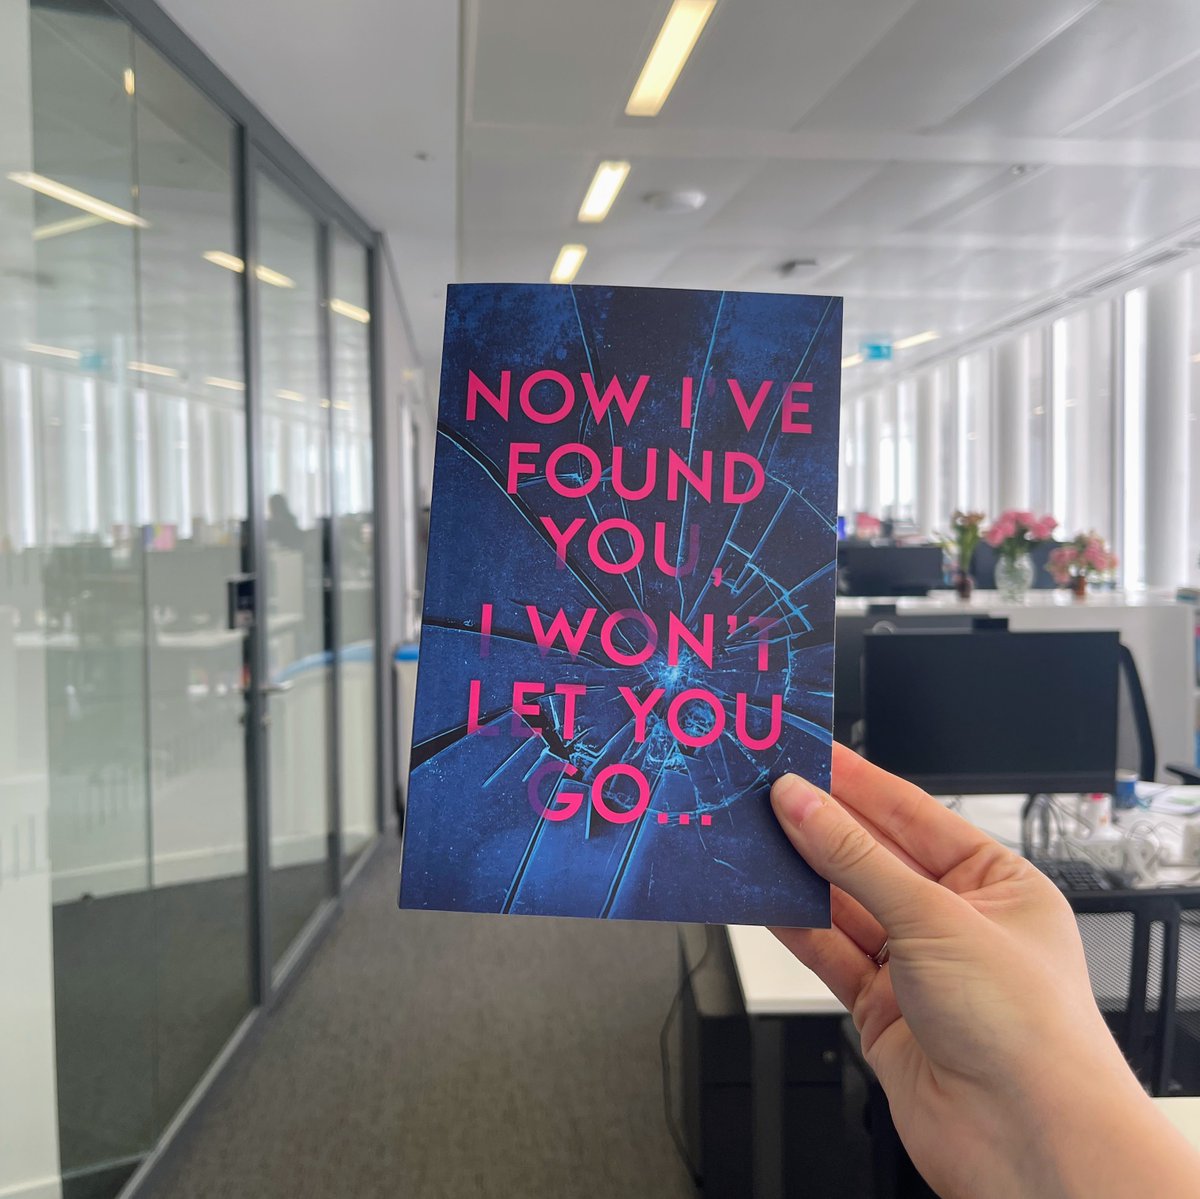 Hot competition alert! Now there's less than a month to go until publication, we're giving a lucky winner the chance to take home the LAST advanced copy of @thewritinghippo's I'm Not Done With You Yet 💗 RT and follow @HQstories to enter. T&Cs apply: bit.ly/3K2cKTA